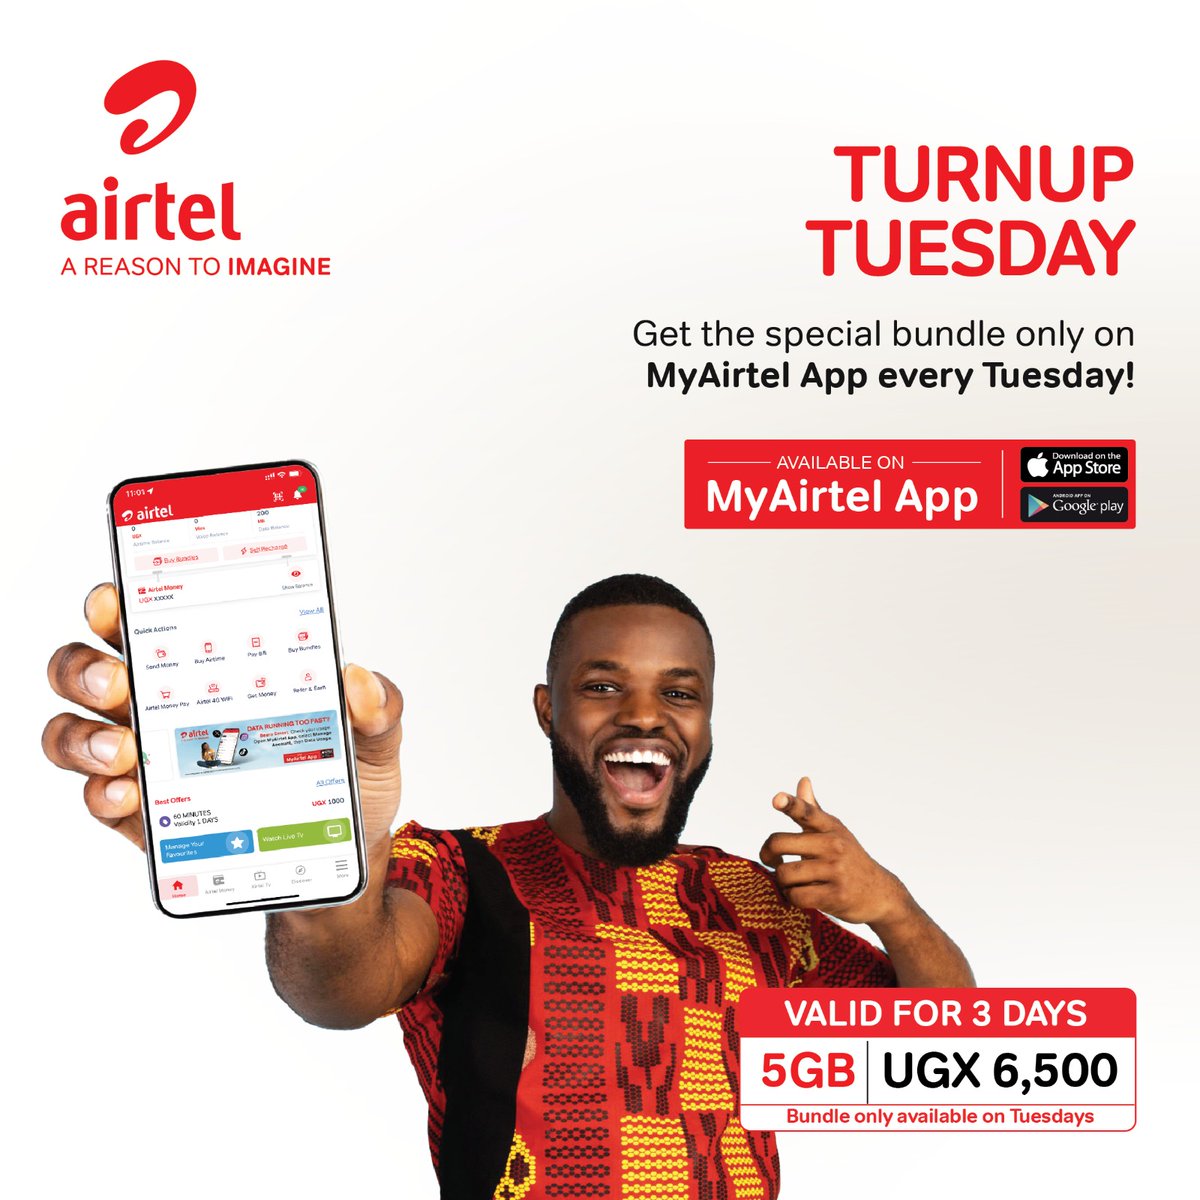 Don't miss today's offer only on the  #MyAirtelApp by downloading it via airtelafrica.onelink.me/cGyr/qgj4qeu2

#TurnUpTuesday